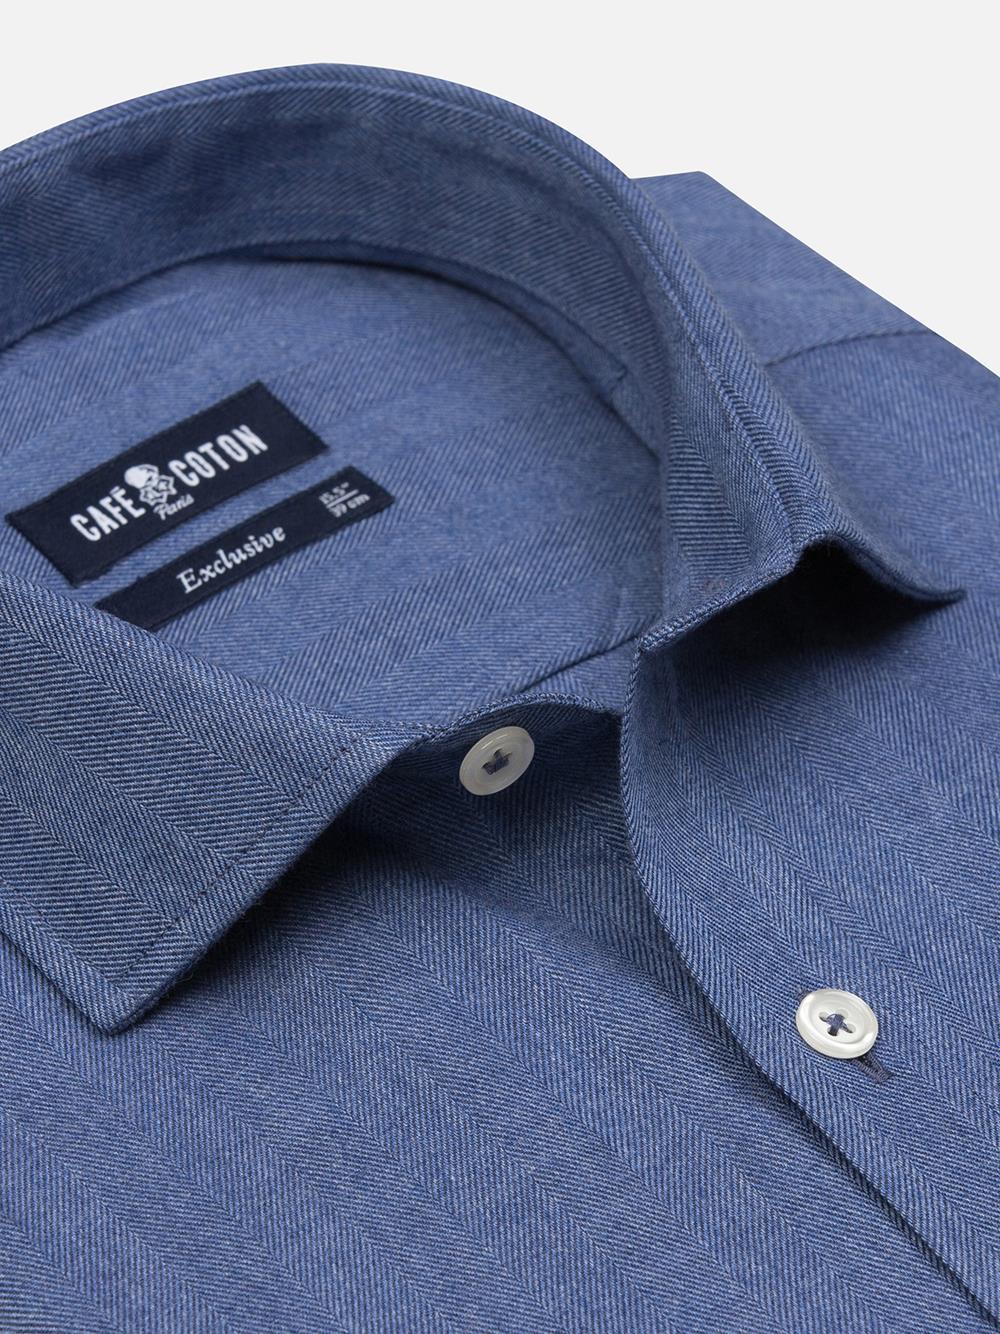  Hall blue flannel slim fit shirt - Extra Long Sleeves